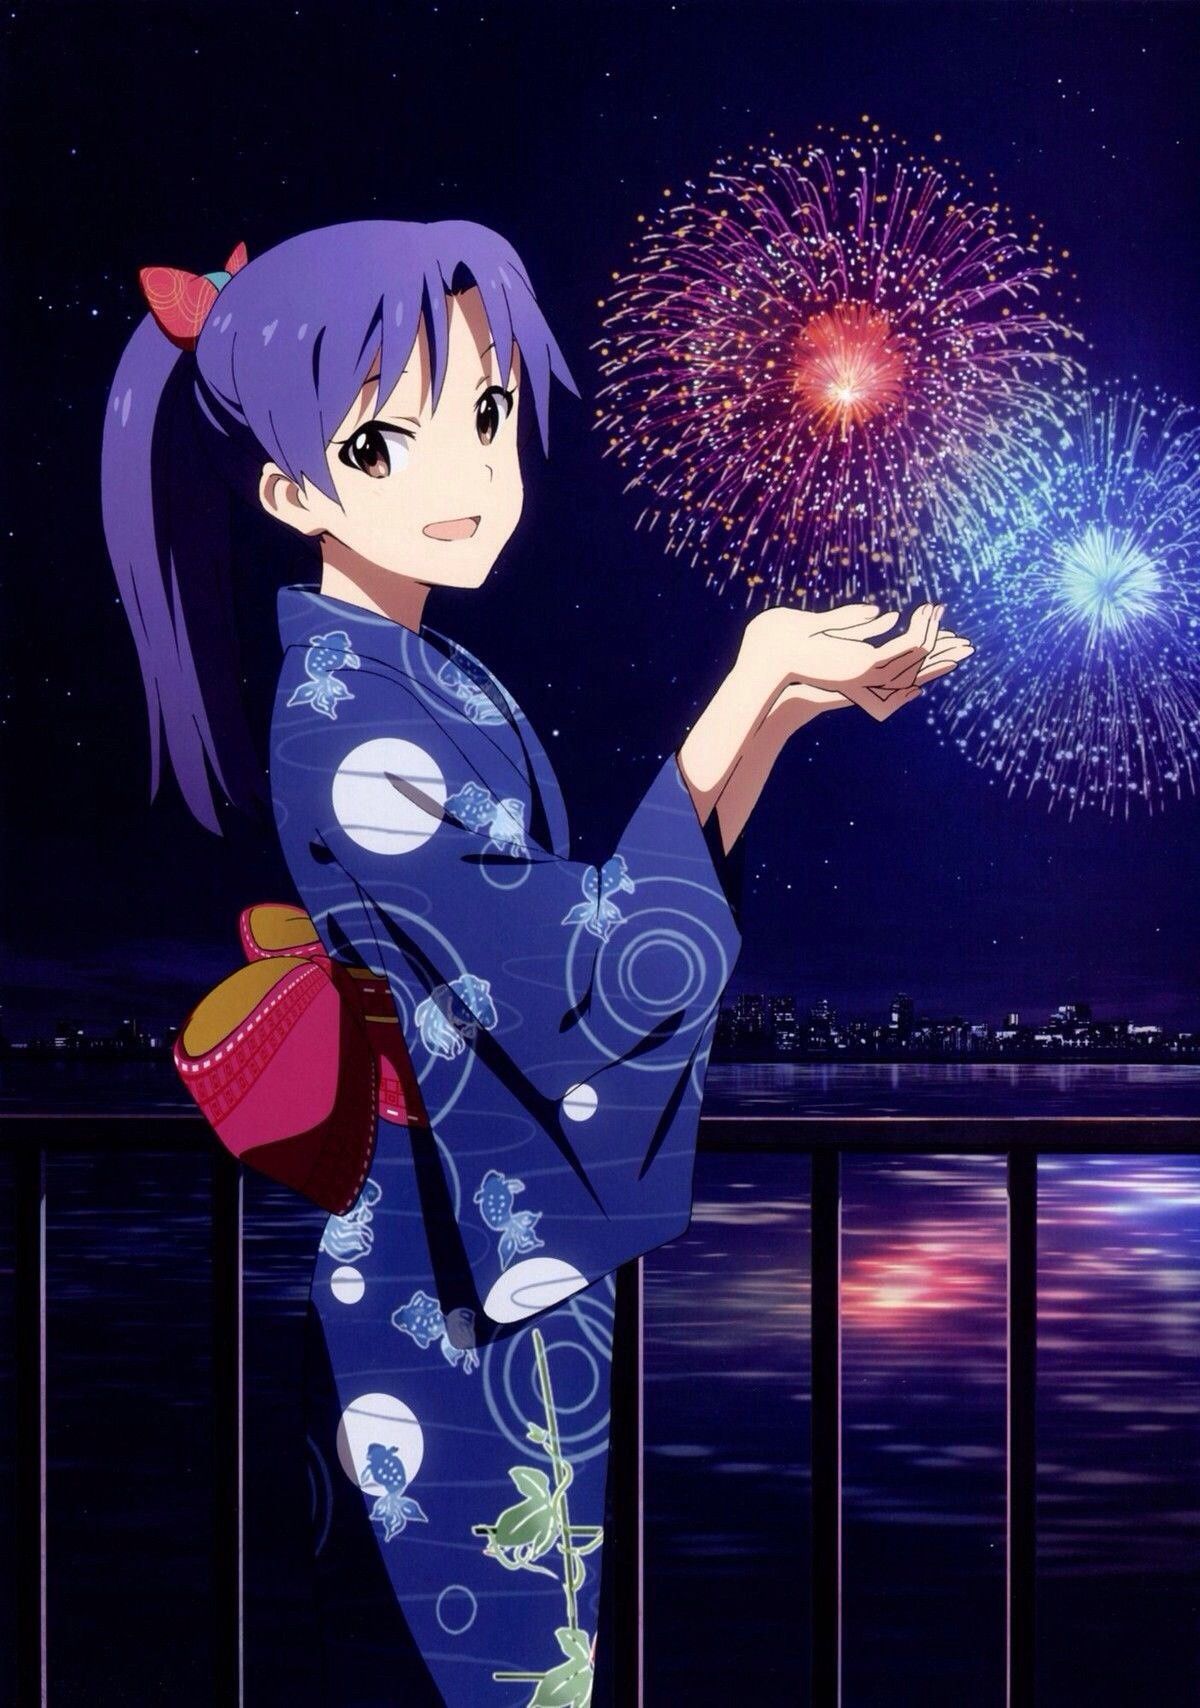 [Image] [ster] Kisaragi chihaya's thing I totally love illustrations of the wwwwwww 43